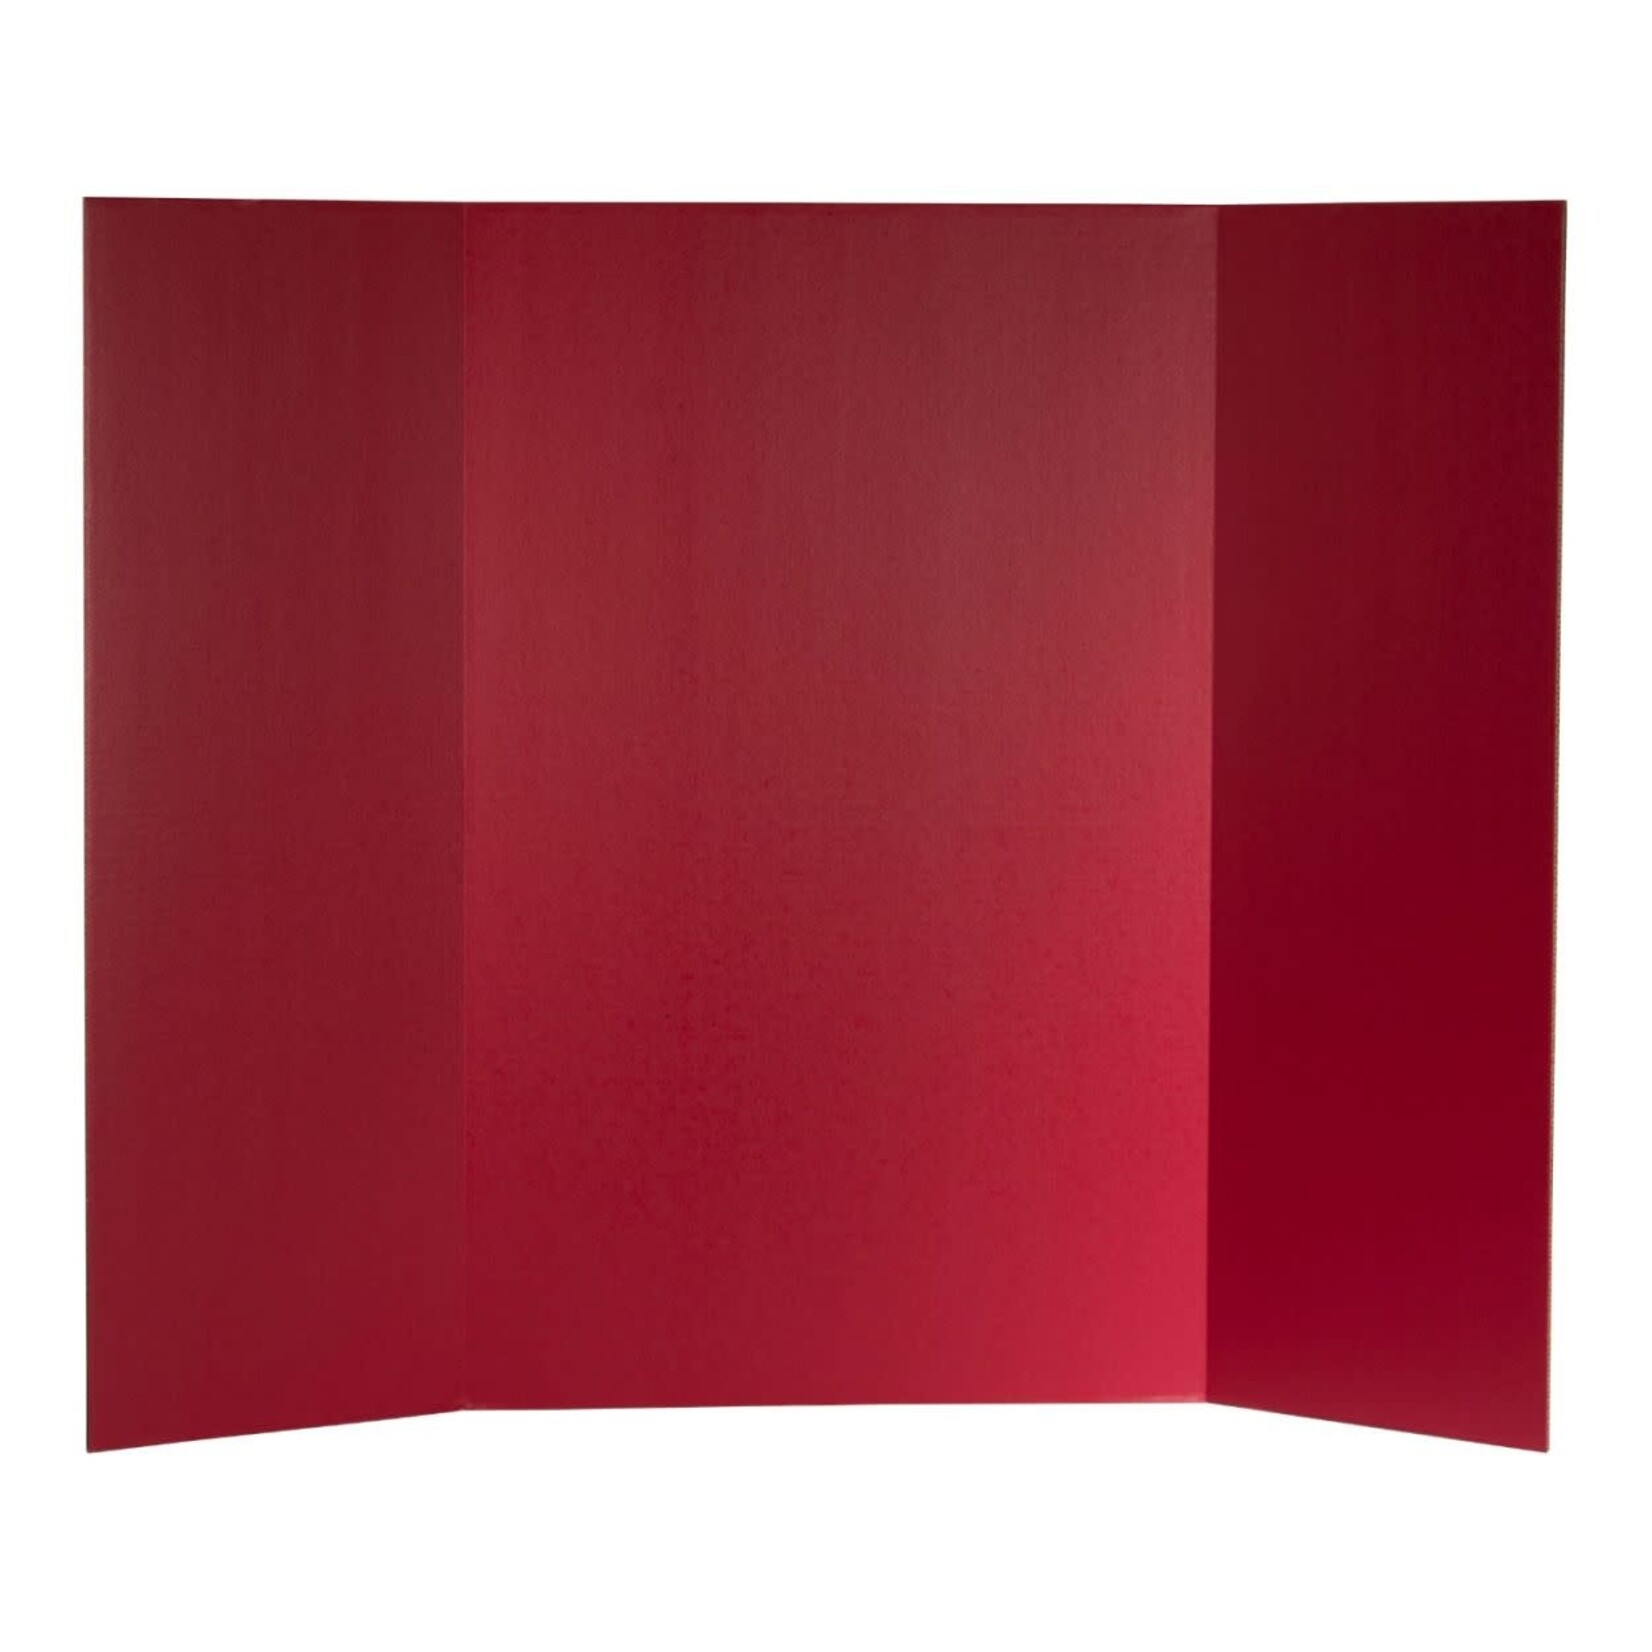 36" x 48" 1-Ply Red Corrugated Project Board - 30069